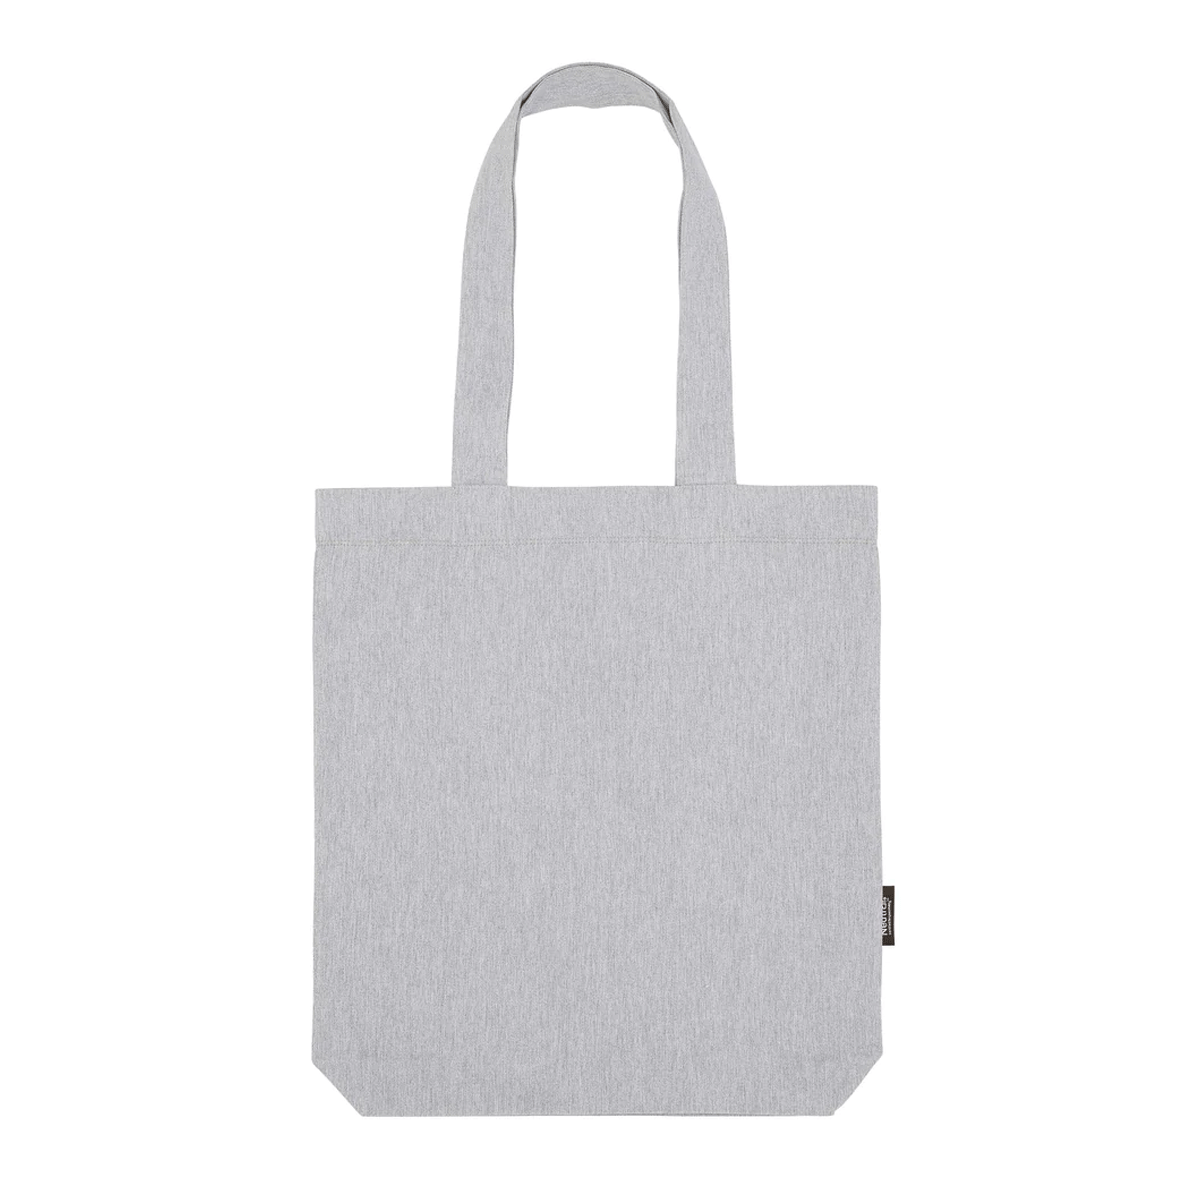 Neutral Recycled Cotton bag